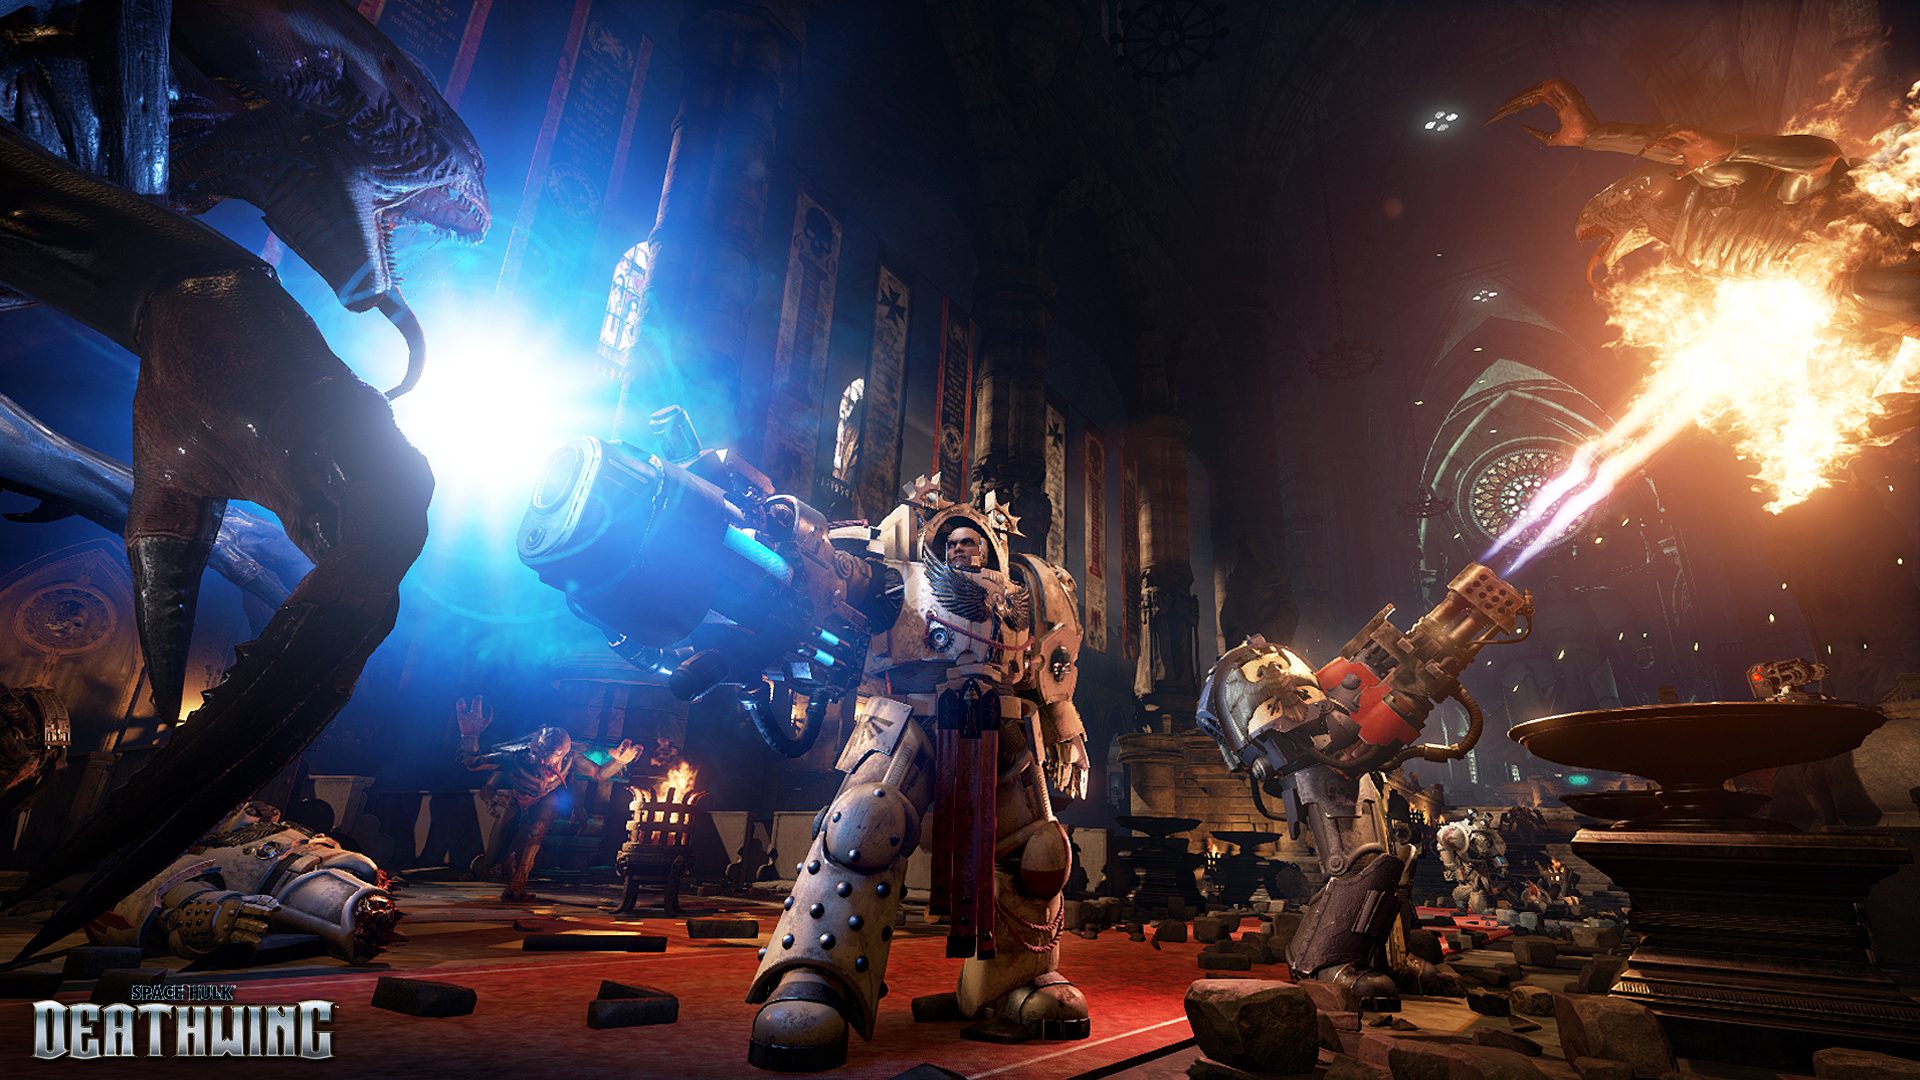 Space Hulk: Deathwing Release Date Confirmed